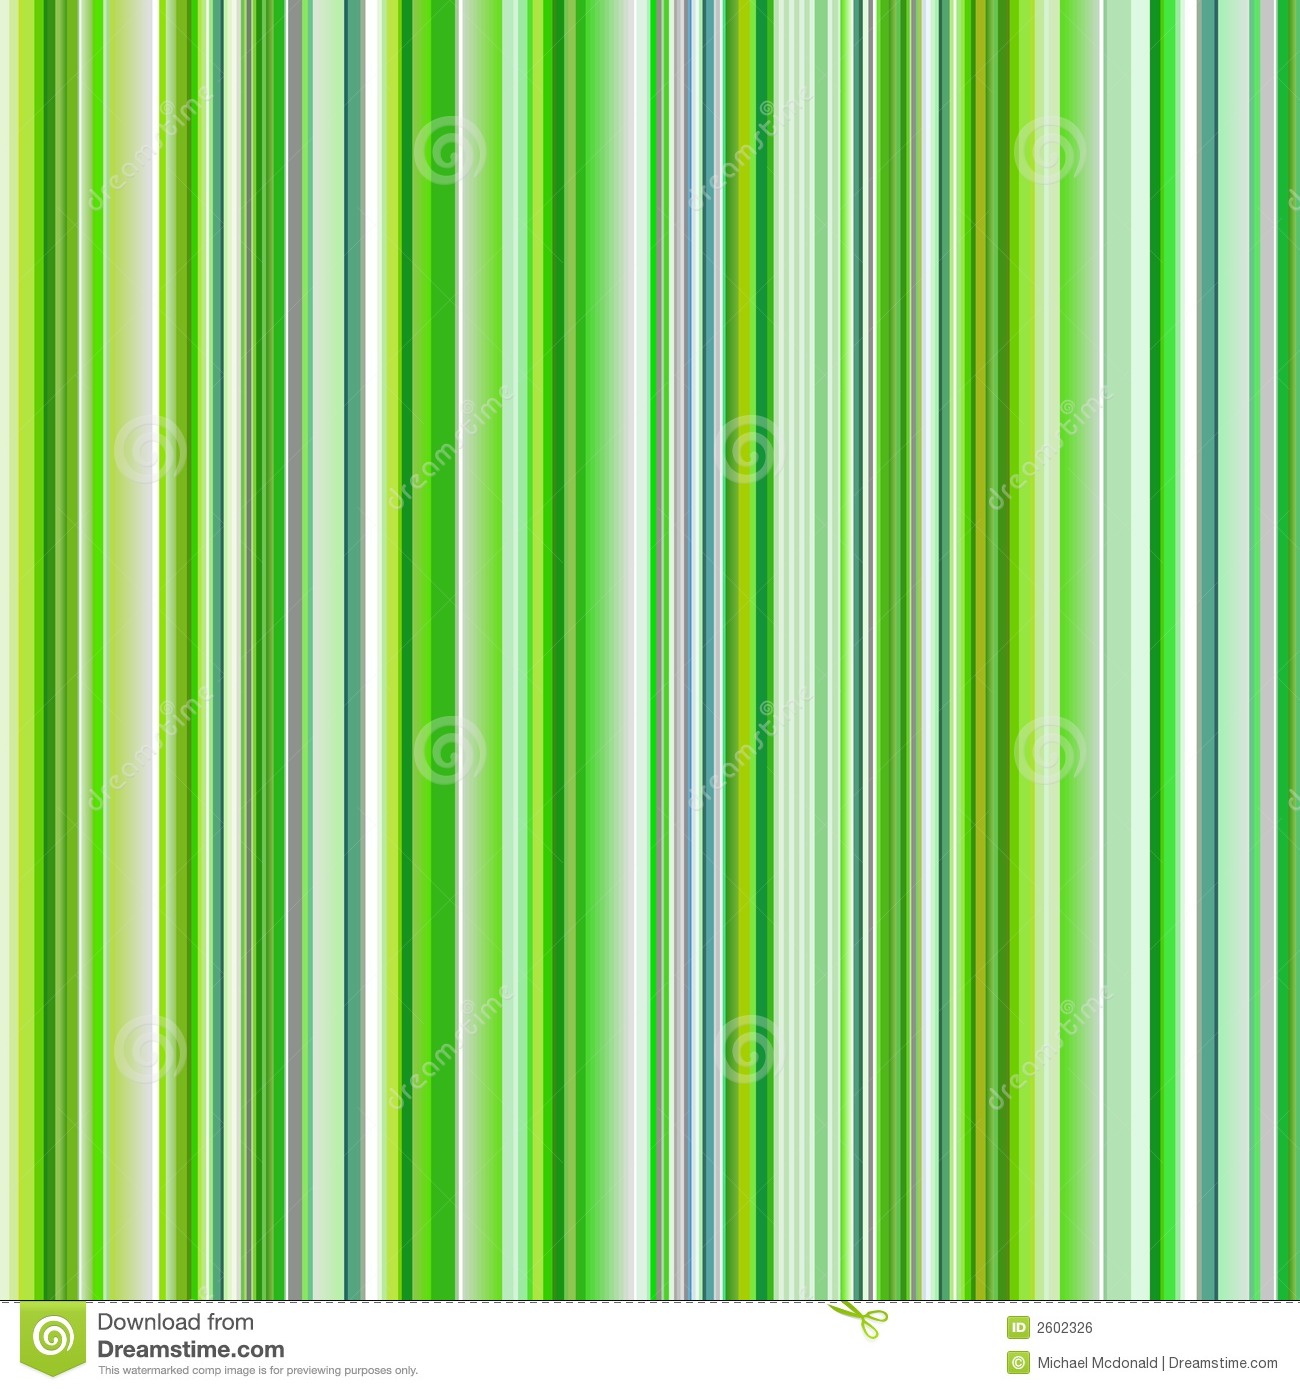 Green Striped Abstract Background Variable Width Stripes